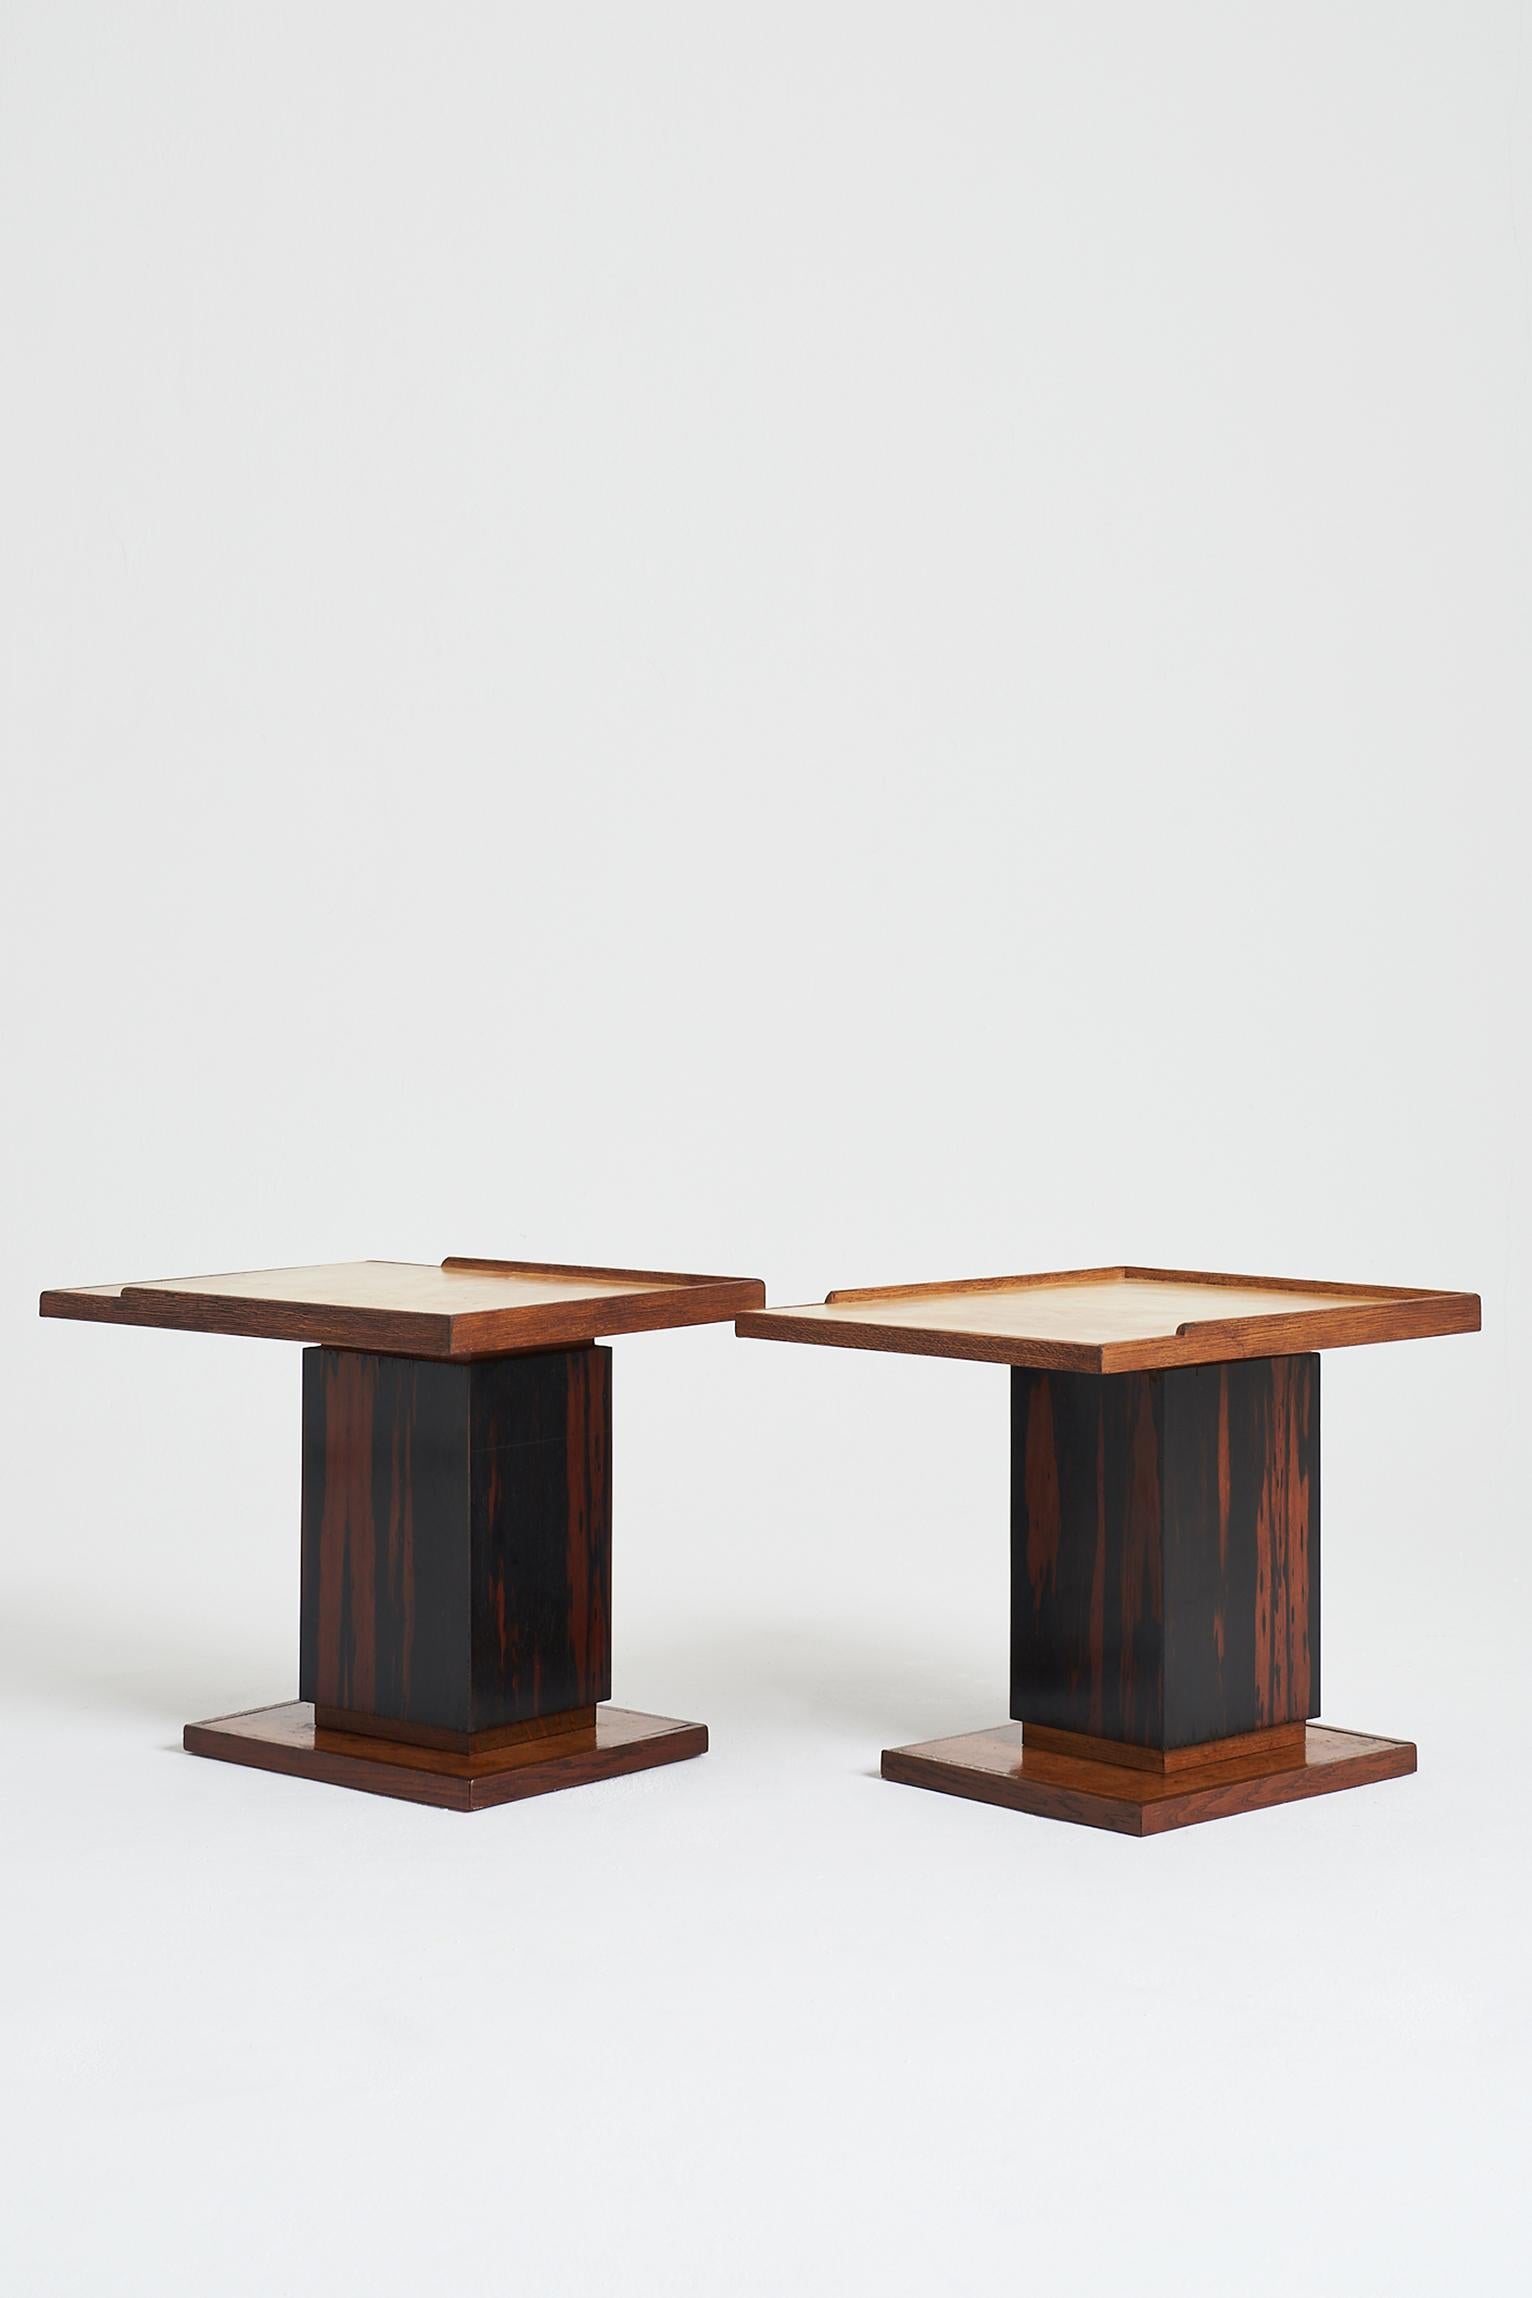 Pair of Velum Side Tables in the manner of Paul-Dupré Lafon 1